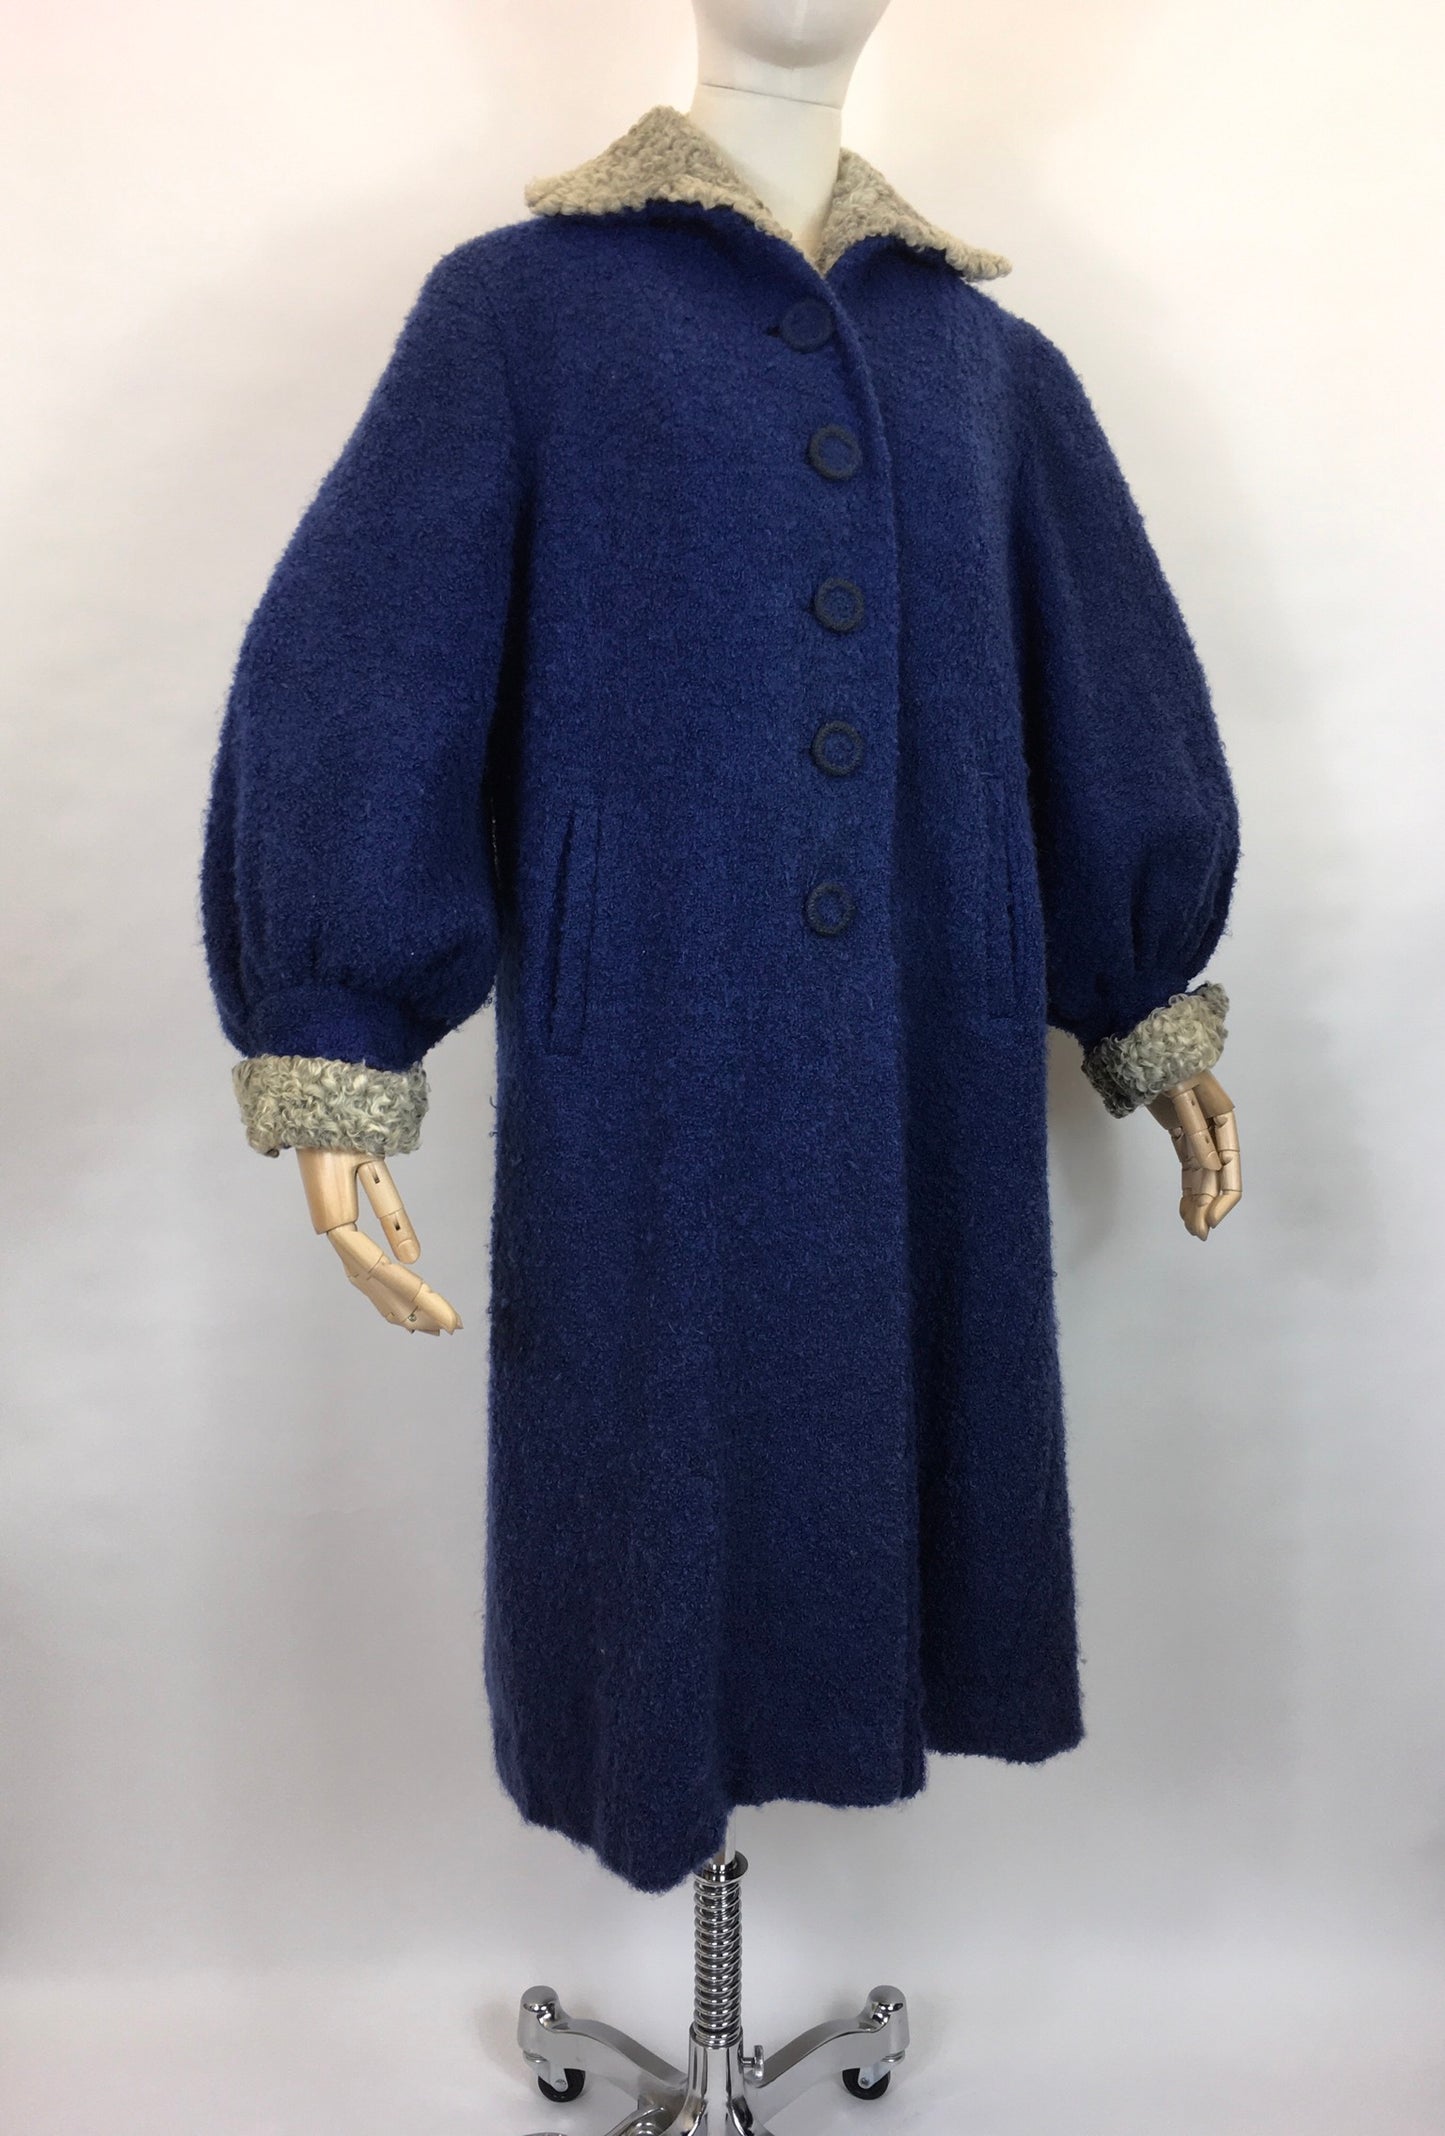 Original 1940’s Amazing Boucle Wool Coat with Astrakhan Trim - In a Royal Blue and Soft Grey